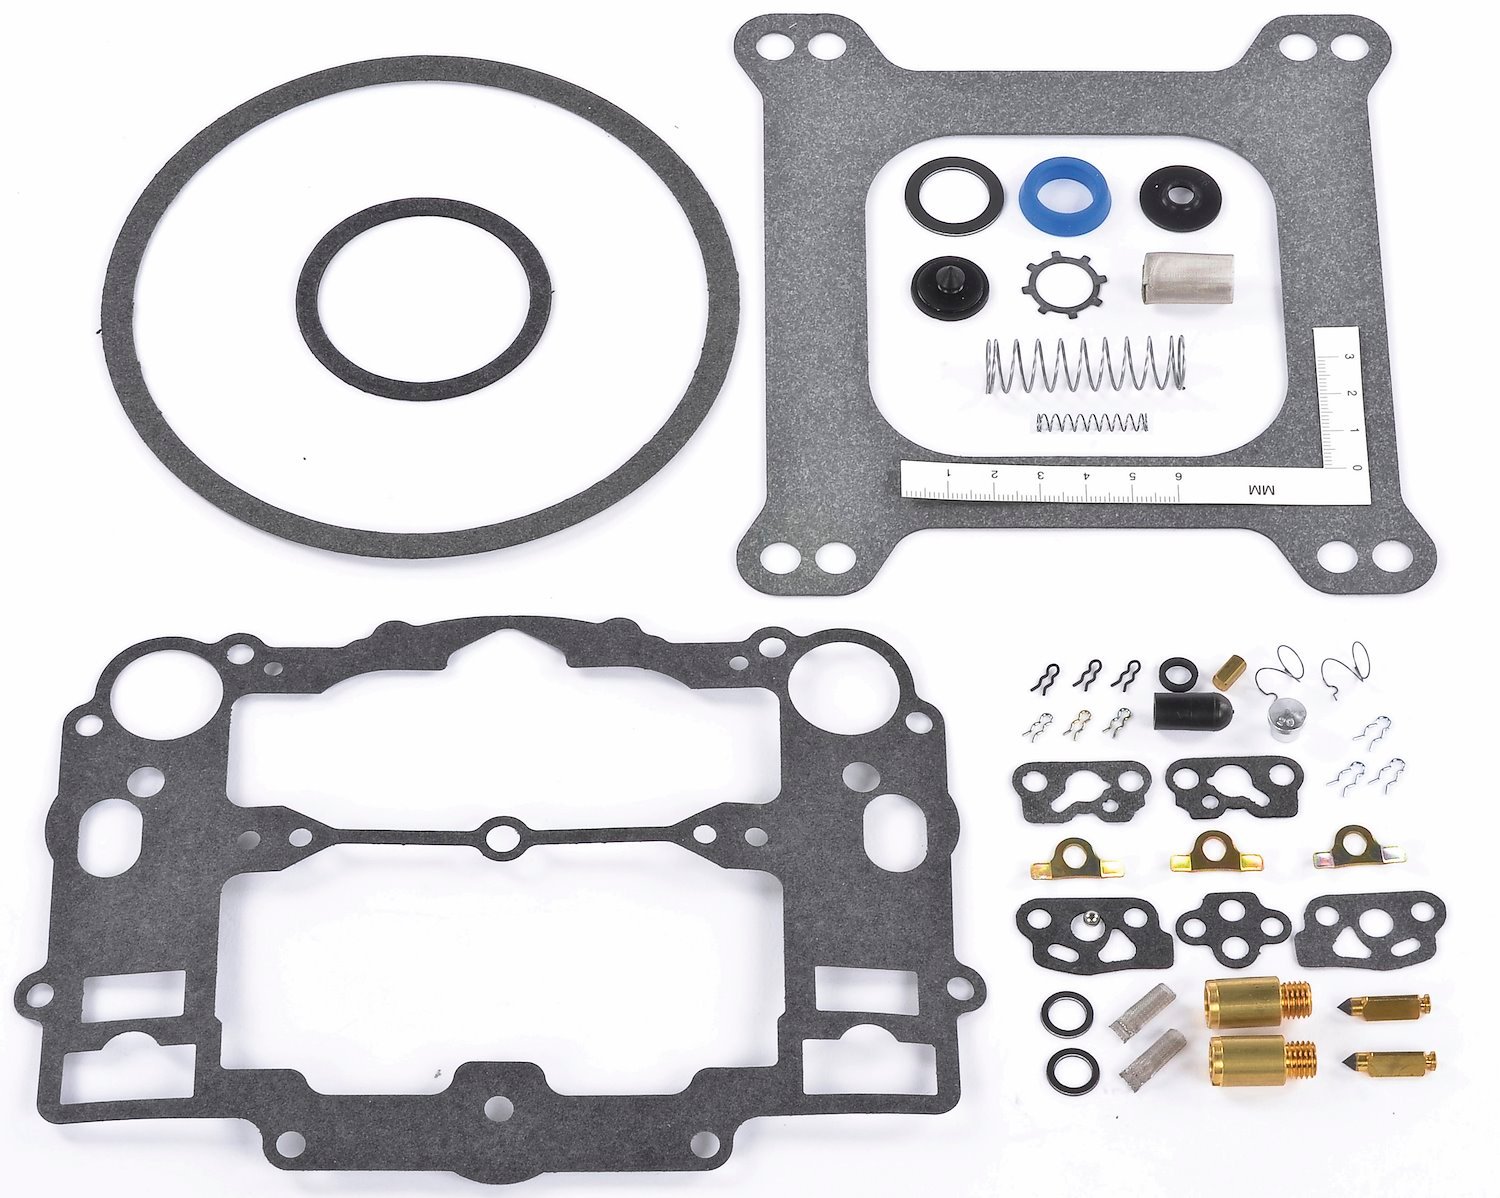 AFB Rebuild Kit Made in the USA